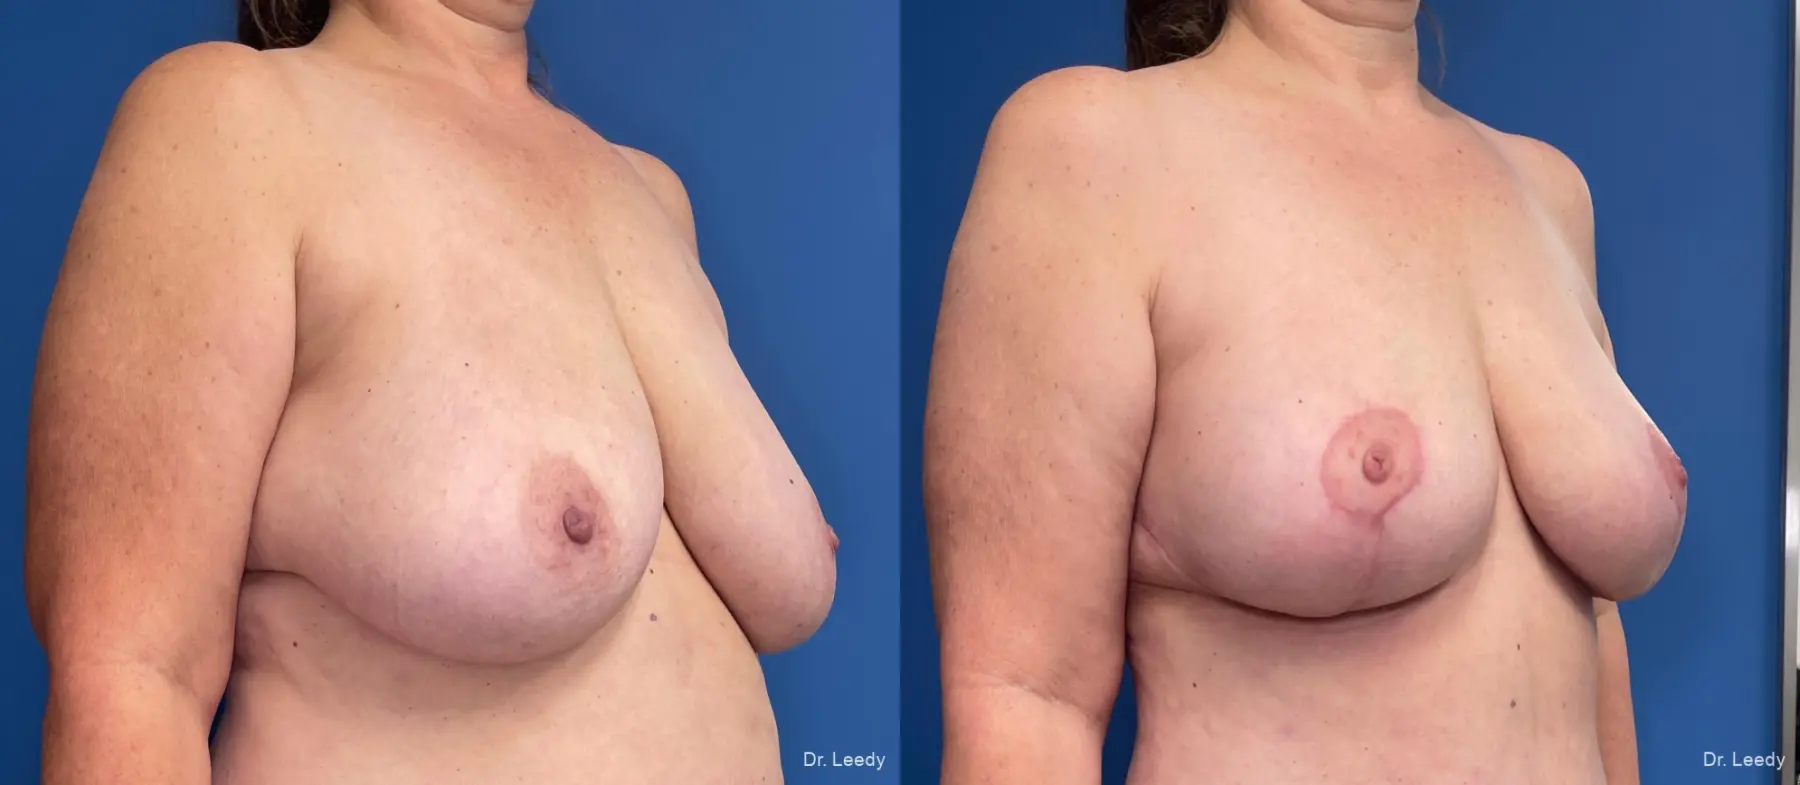 Mastopexy: Patient 4 - Before and After 2